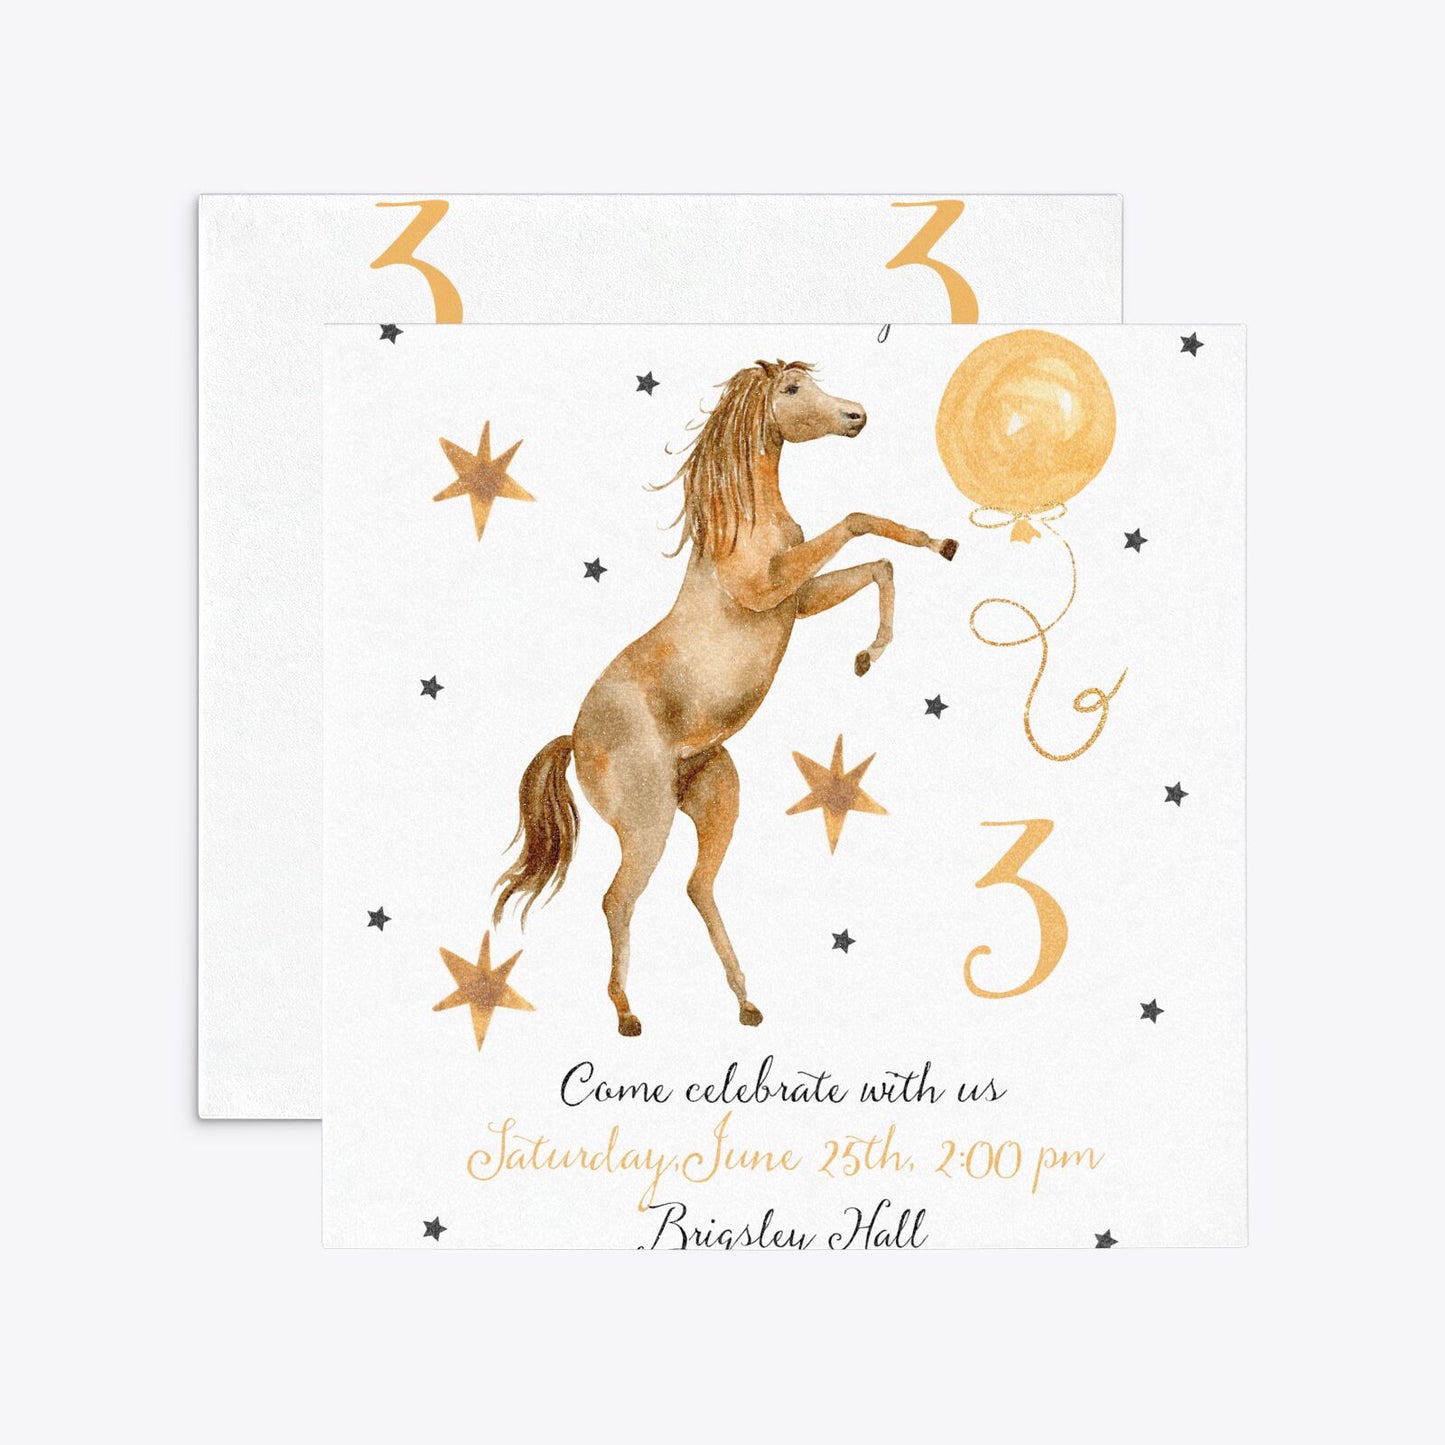 Personalised Horse Happy Birthday Square 5 25x5 25 Invitation Glitter Front and Back Image